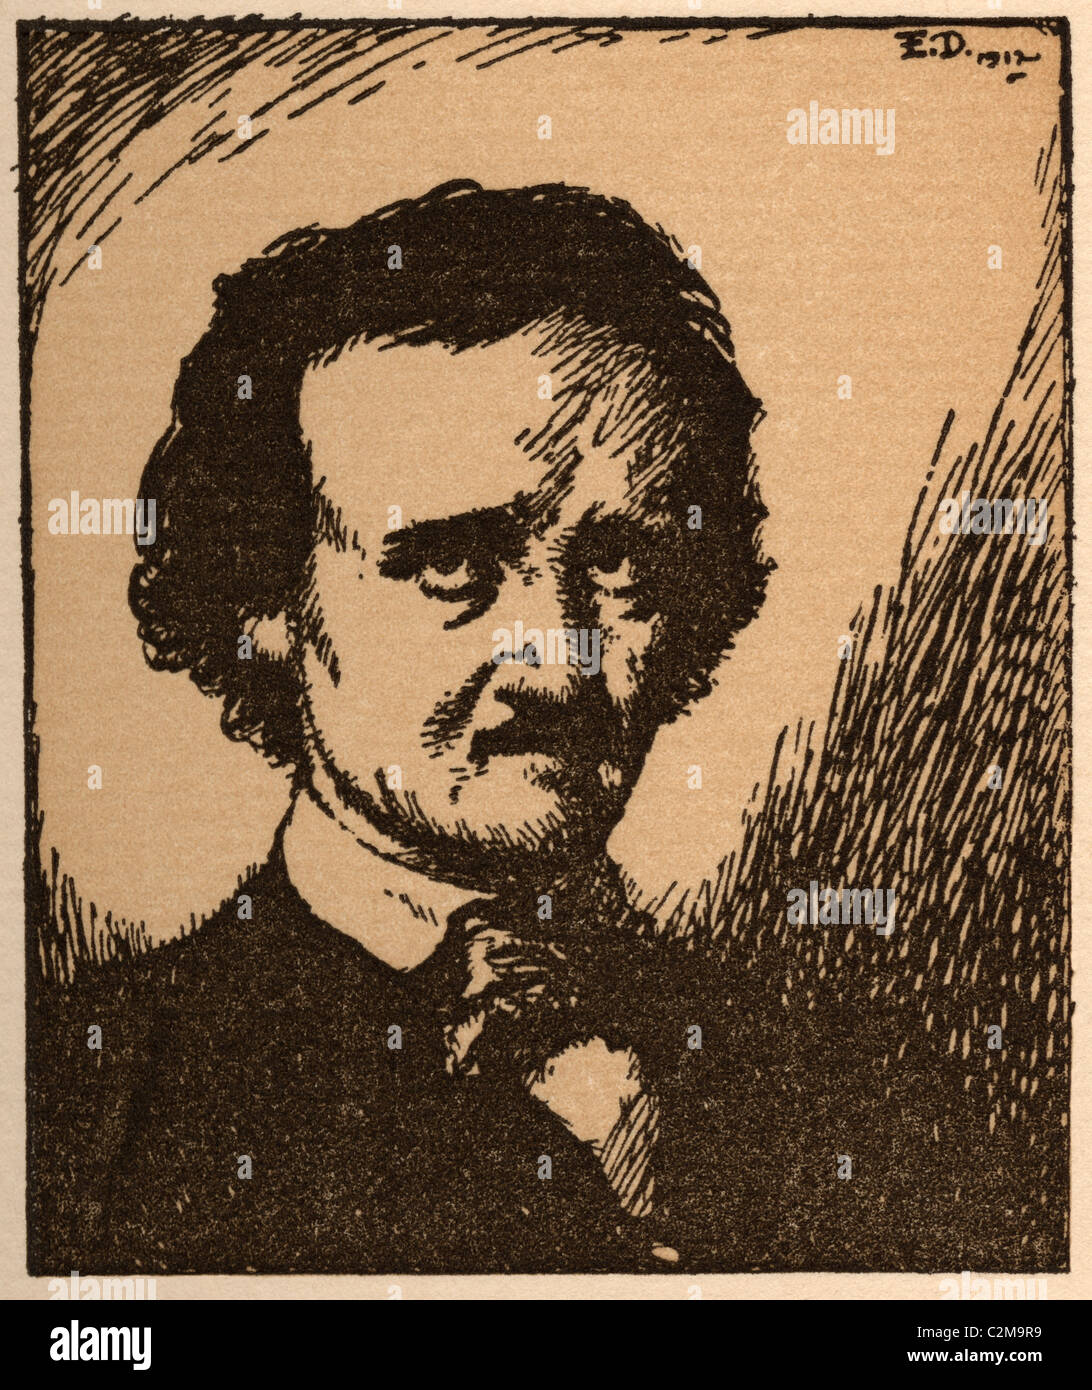 Portrait of Edgar Allan Poe illustrated by Edmund Dulac Stock Photo